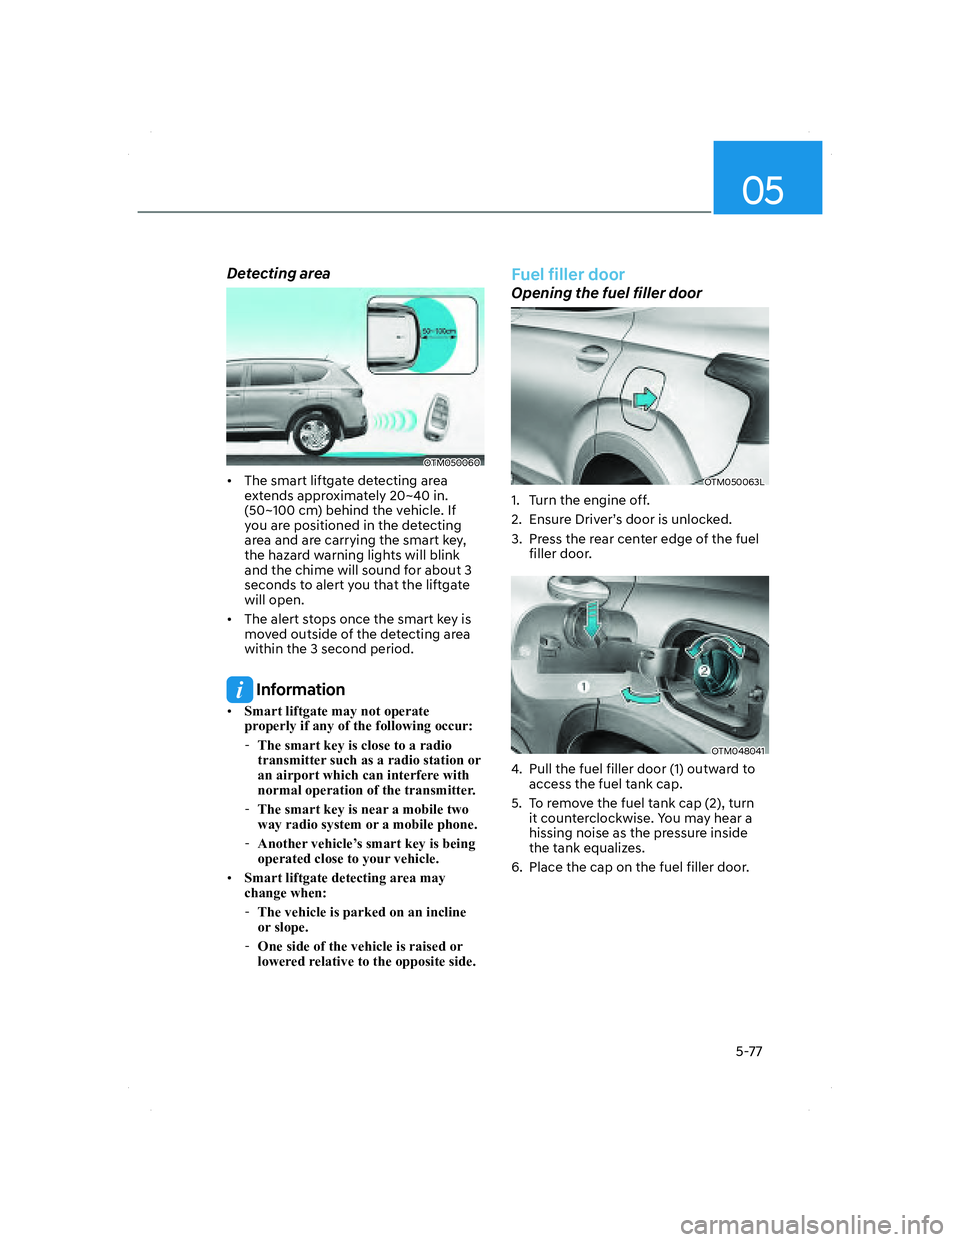 HYUNDAI SANTA FE 2022  Owners Manual 05
5-77
Detecting area
OTM050060OTM050060
•  The smart liftgate detecting area 
extends approximately 20~40 in. 
(50~100 cm) behind the vehicle. If 
you are positioned in the detecting 
area and are